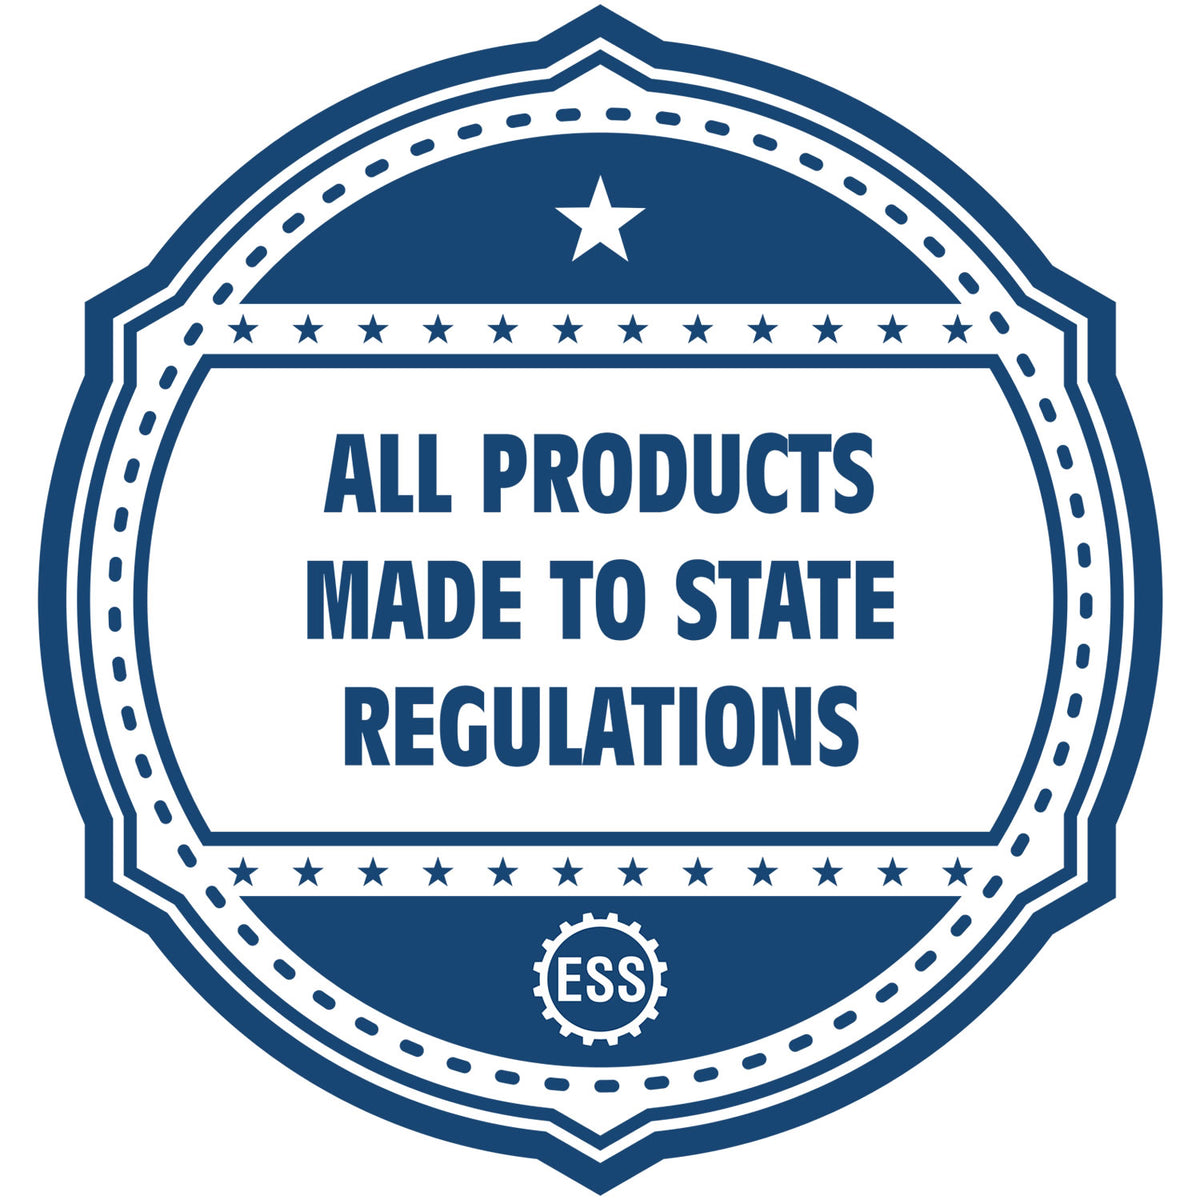 An icon or badge element for the PSI North Carolina Notary Stamp showing that this product is made in compliance with state regulations.